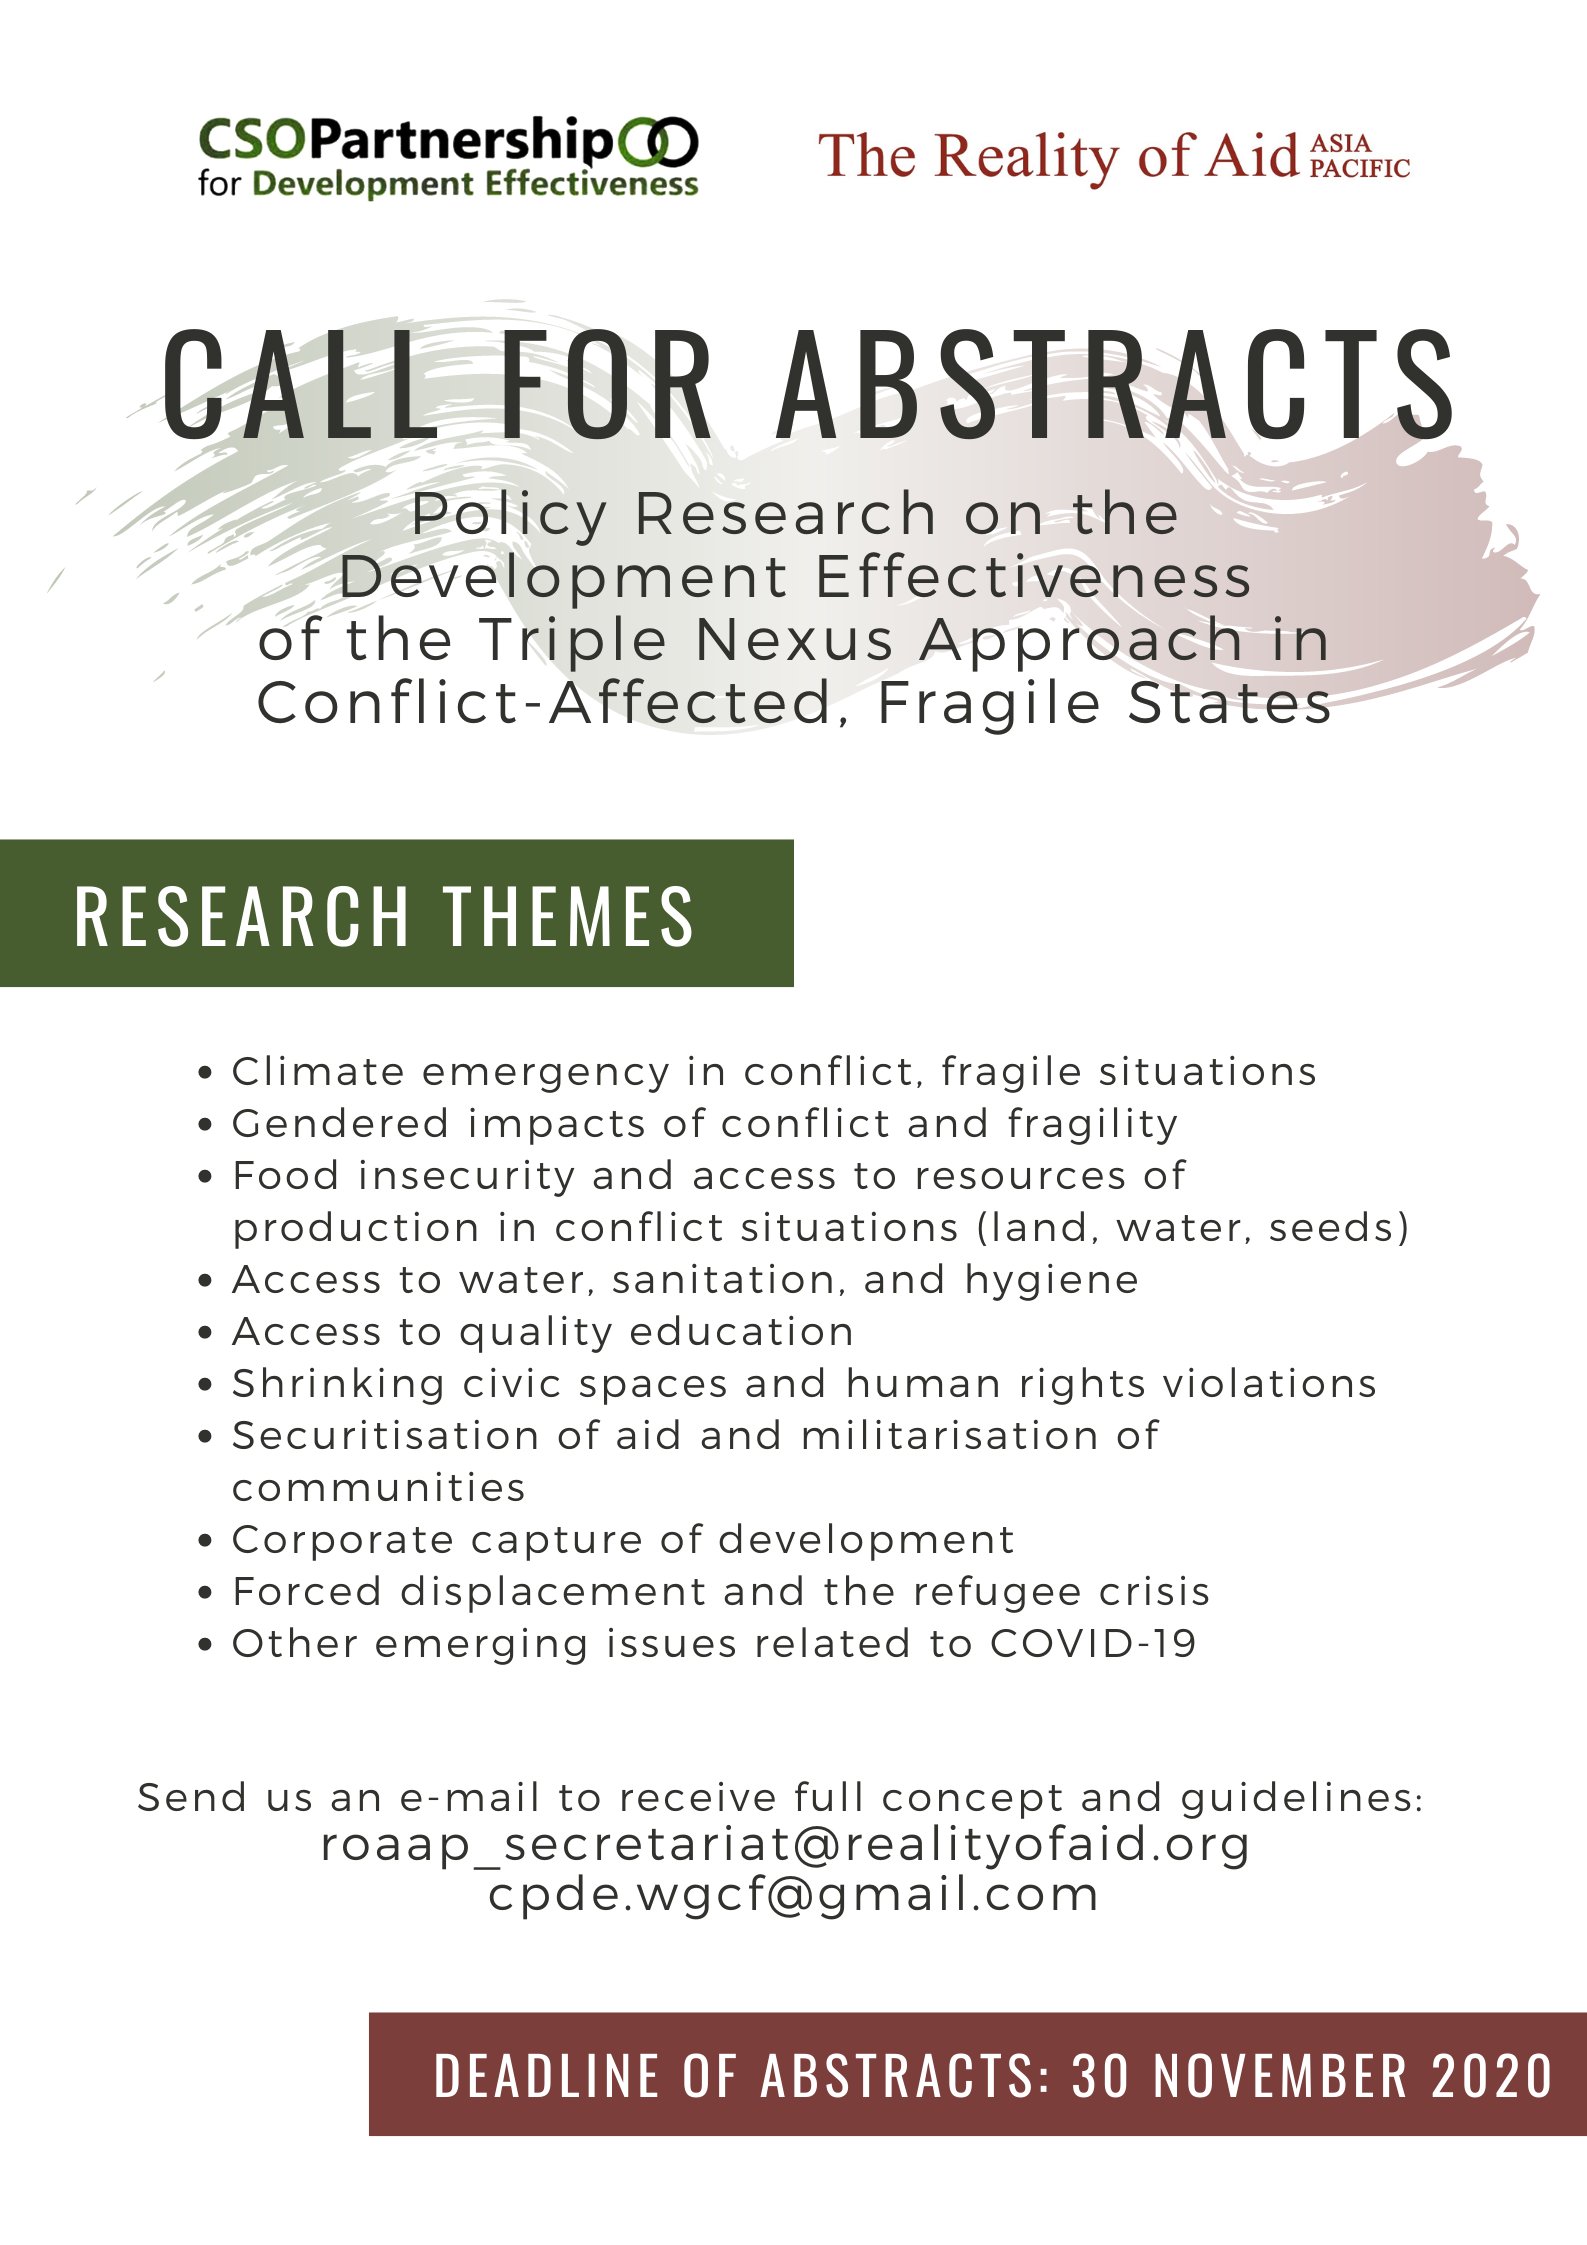 Policy Research on Development Effectiveness of the Triple Nexus.